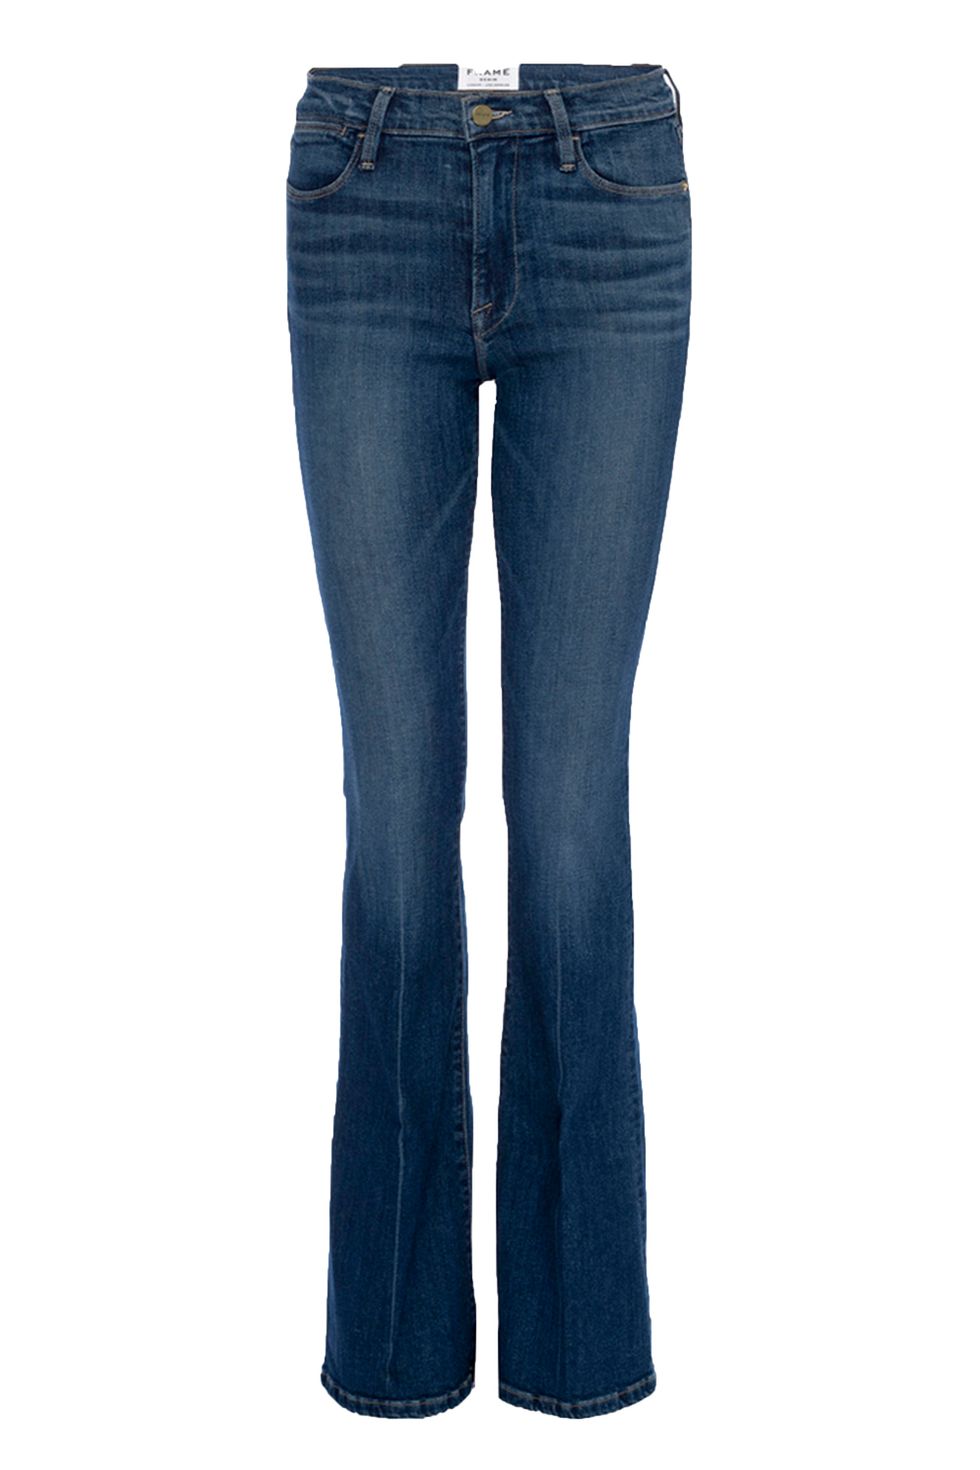 23 Flared Jeans For Fall - Best Pairs of Flared Jeans for Fall